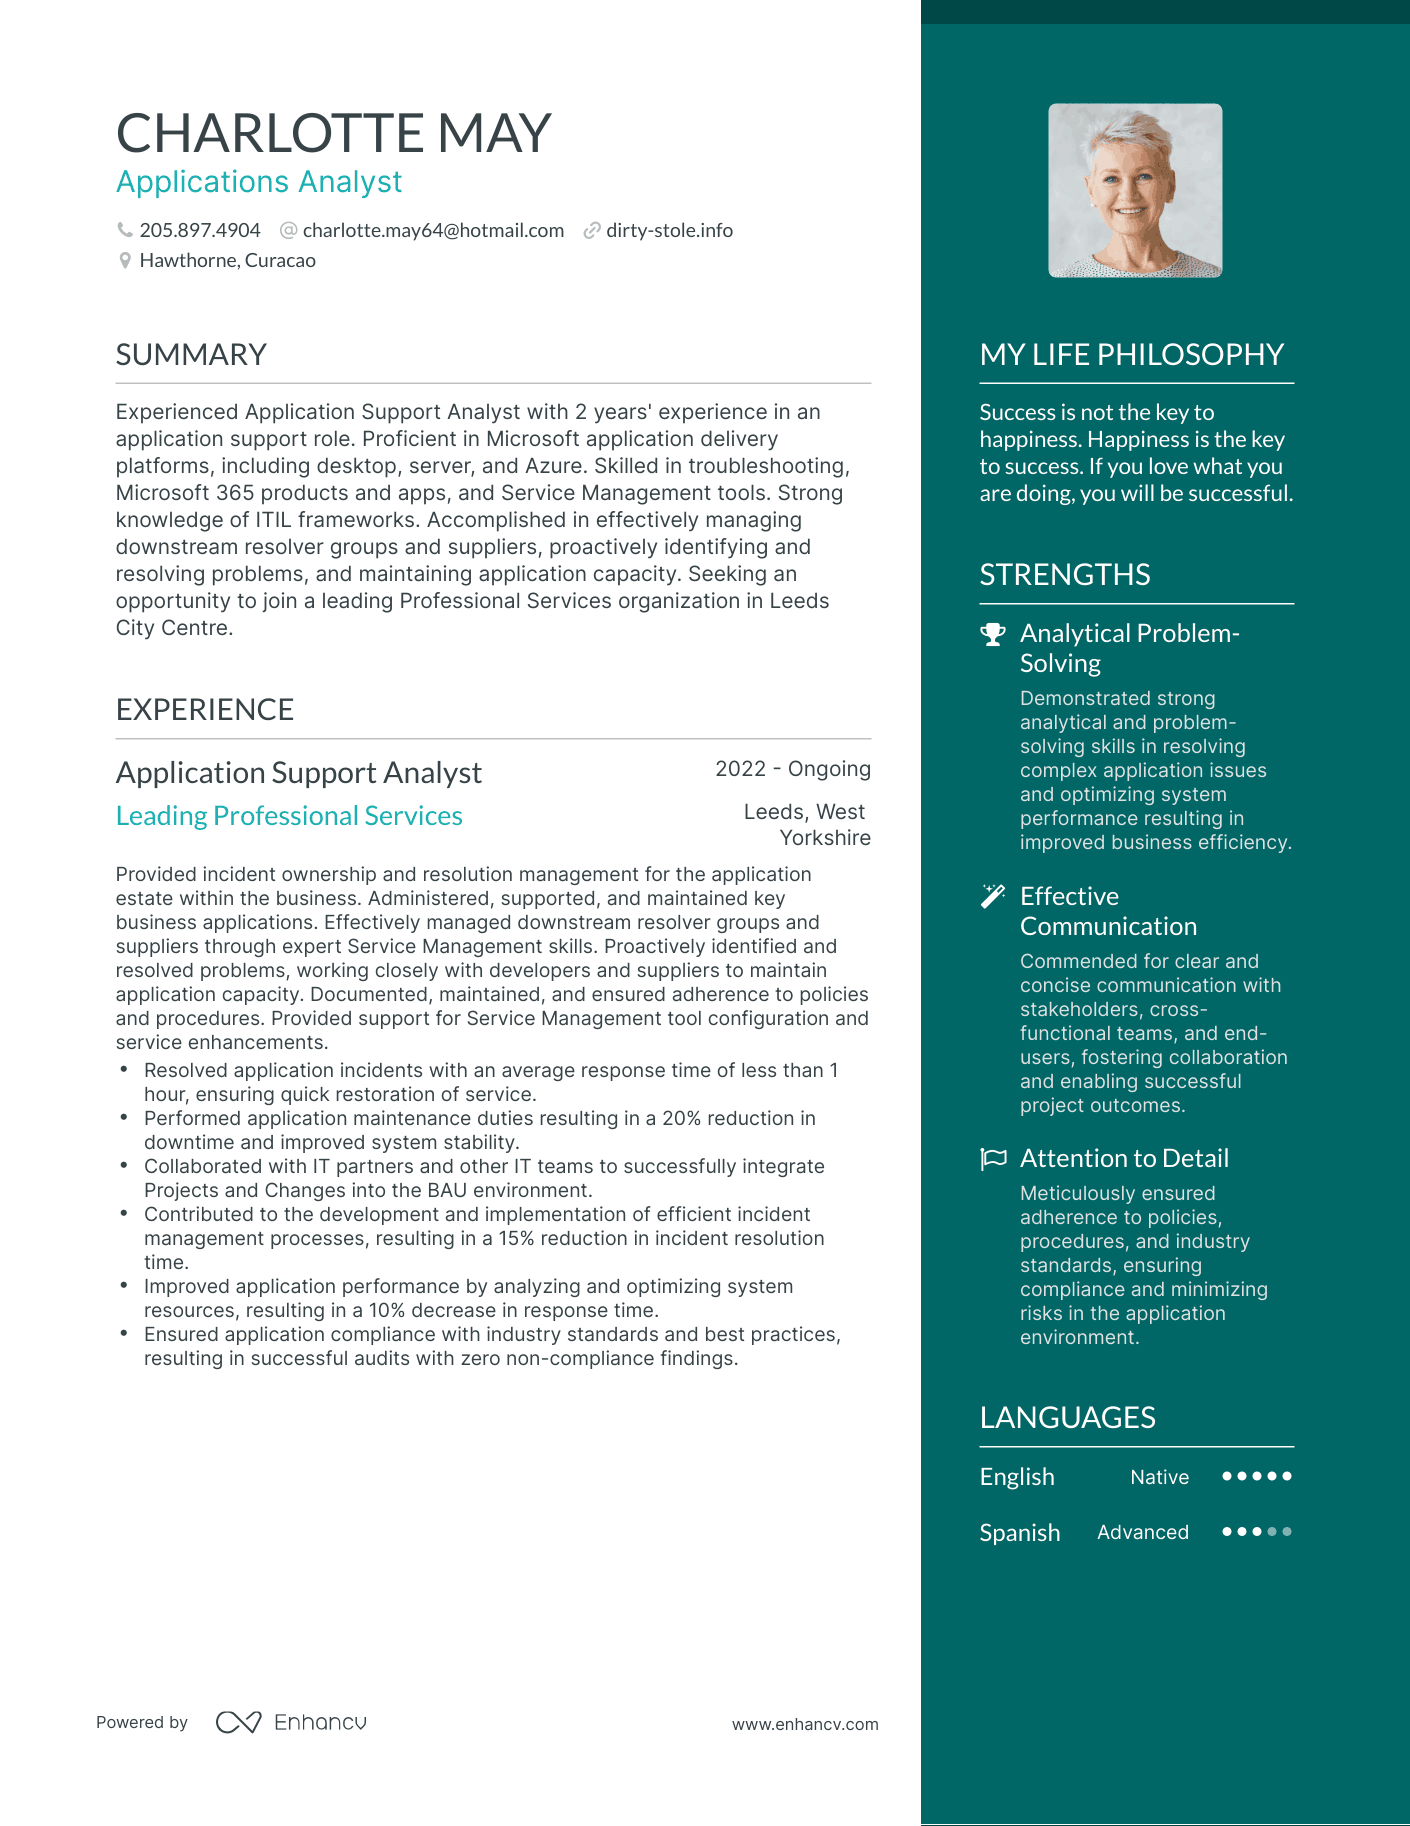 Applications Analyst resume example